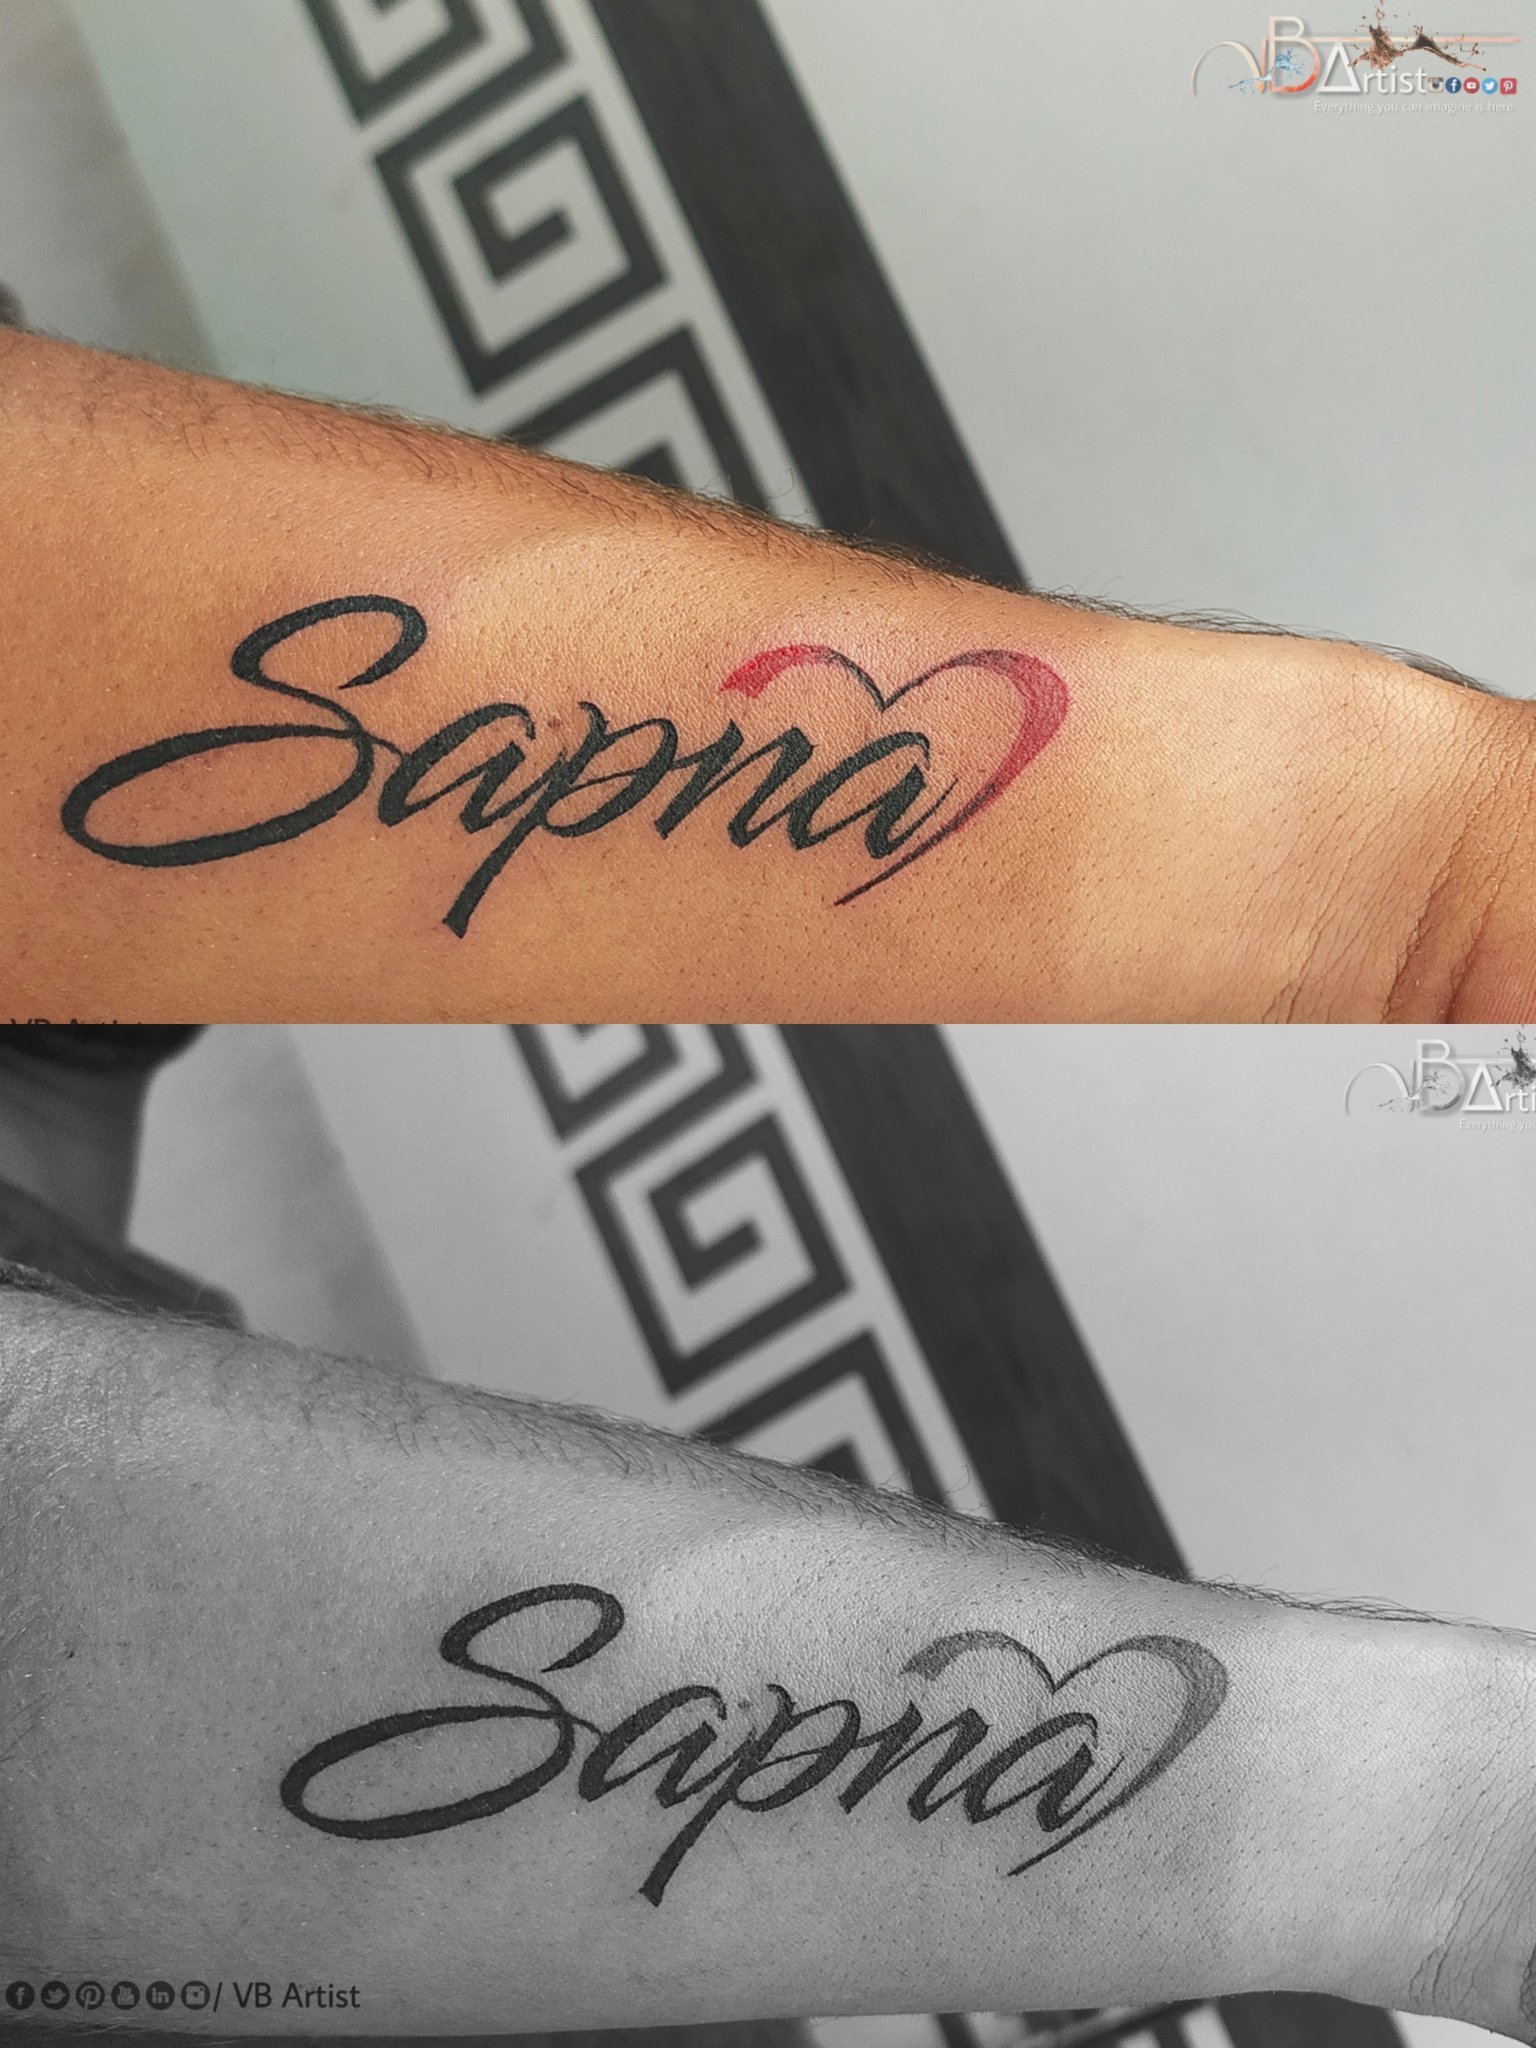 Vb Artist Name Tattoo Book Your Appointments 91 7354 33 7002 Tattoos Tattoo Ink Inked Tattooartist Tattooed Art Tattooart Tattoolife Tattooing Tattooist Tattooideas Artist Tattoostyle Tattooer Love Sapnaname